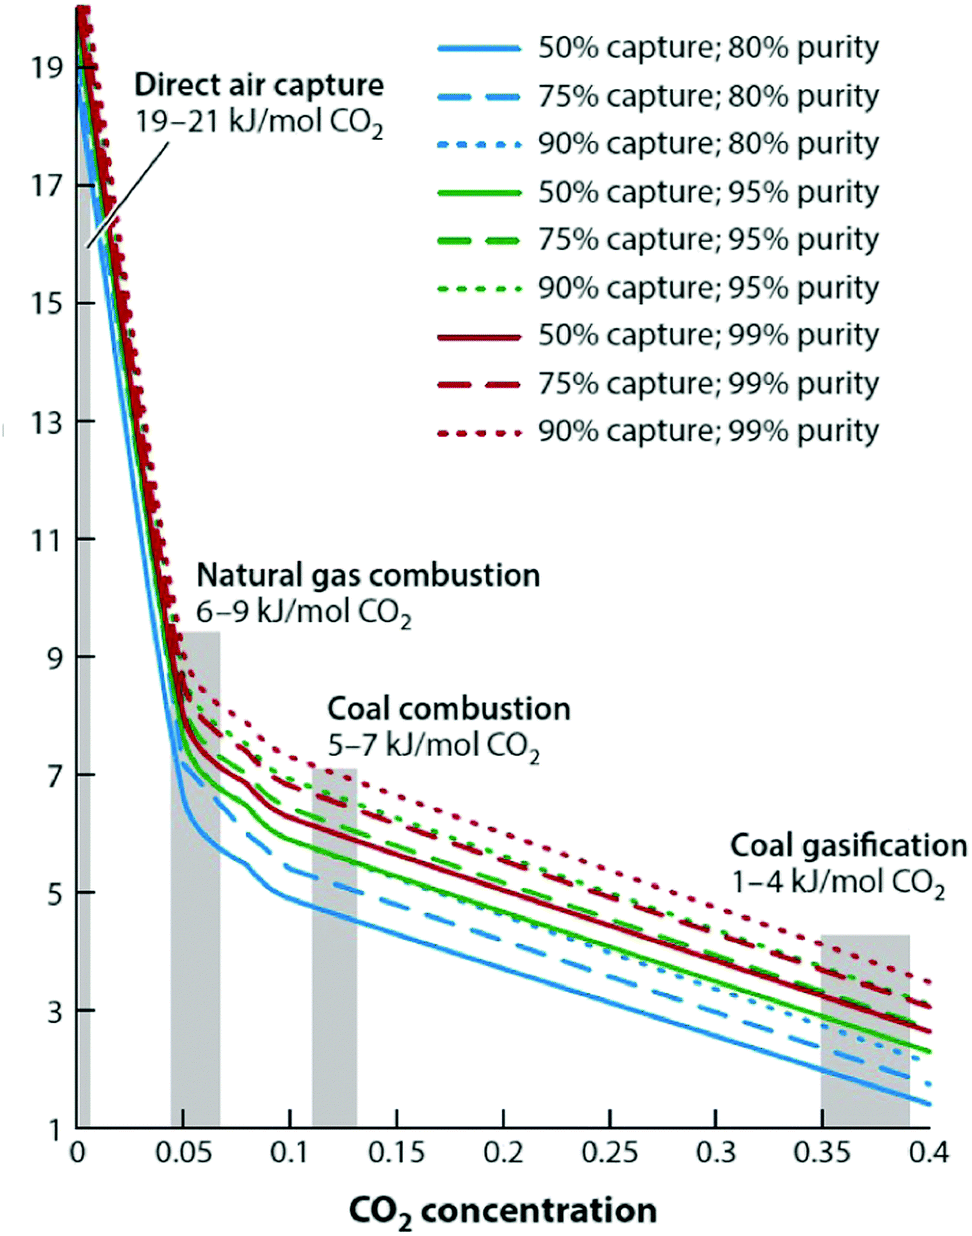 Carbon capture and storage (CCS): the way forward - Energy